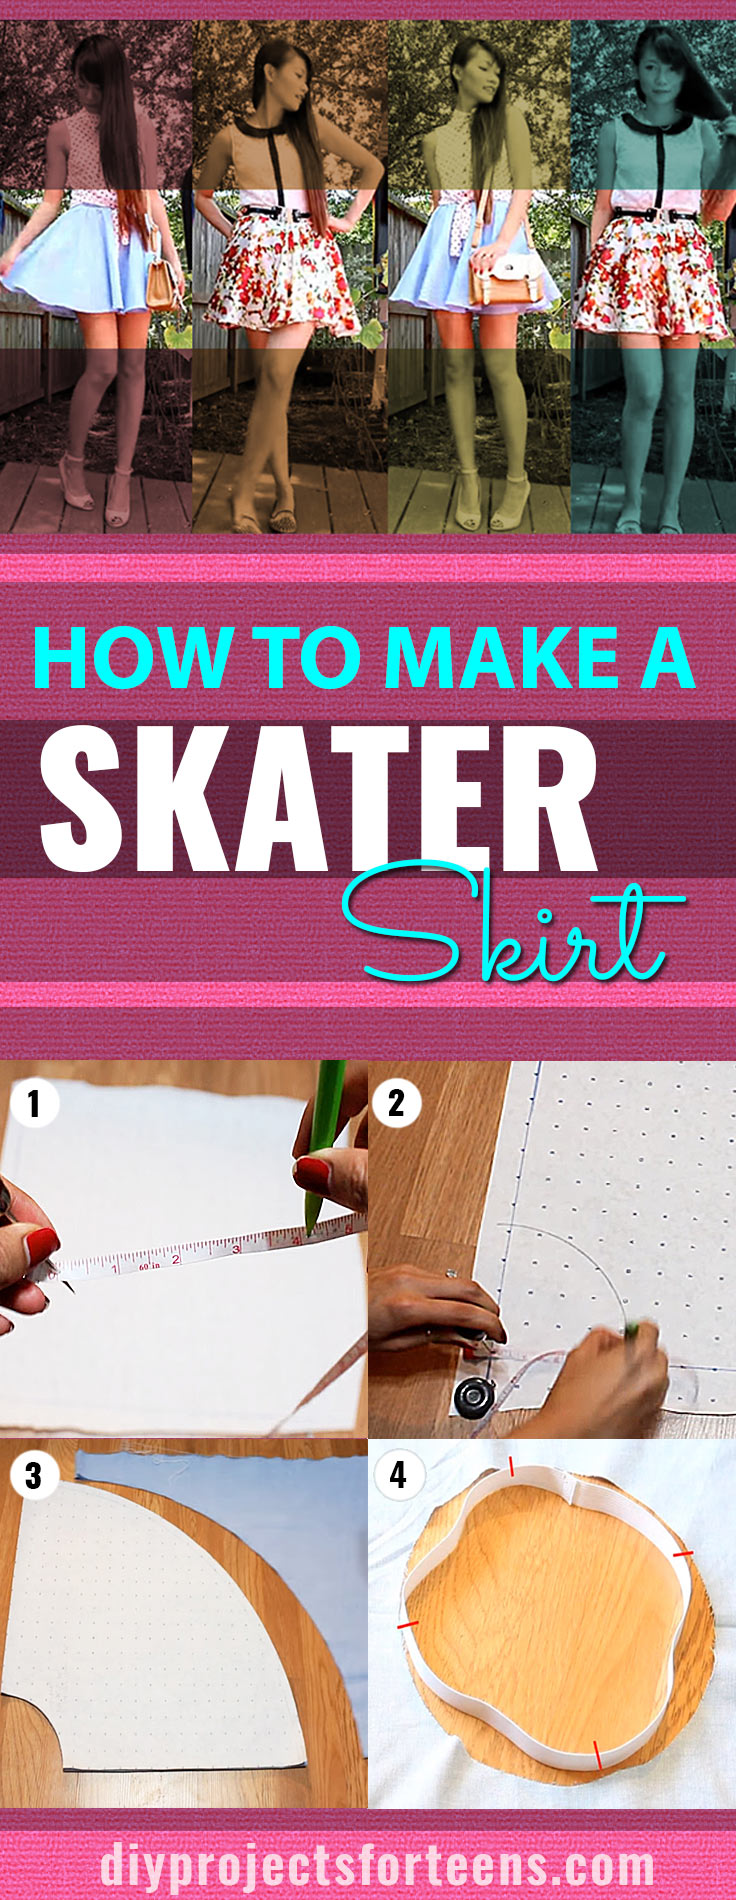 DIY Fashion for Teens - Cool Skater Skirt Tutorial shows you an easy sewing idea for fun fashion